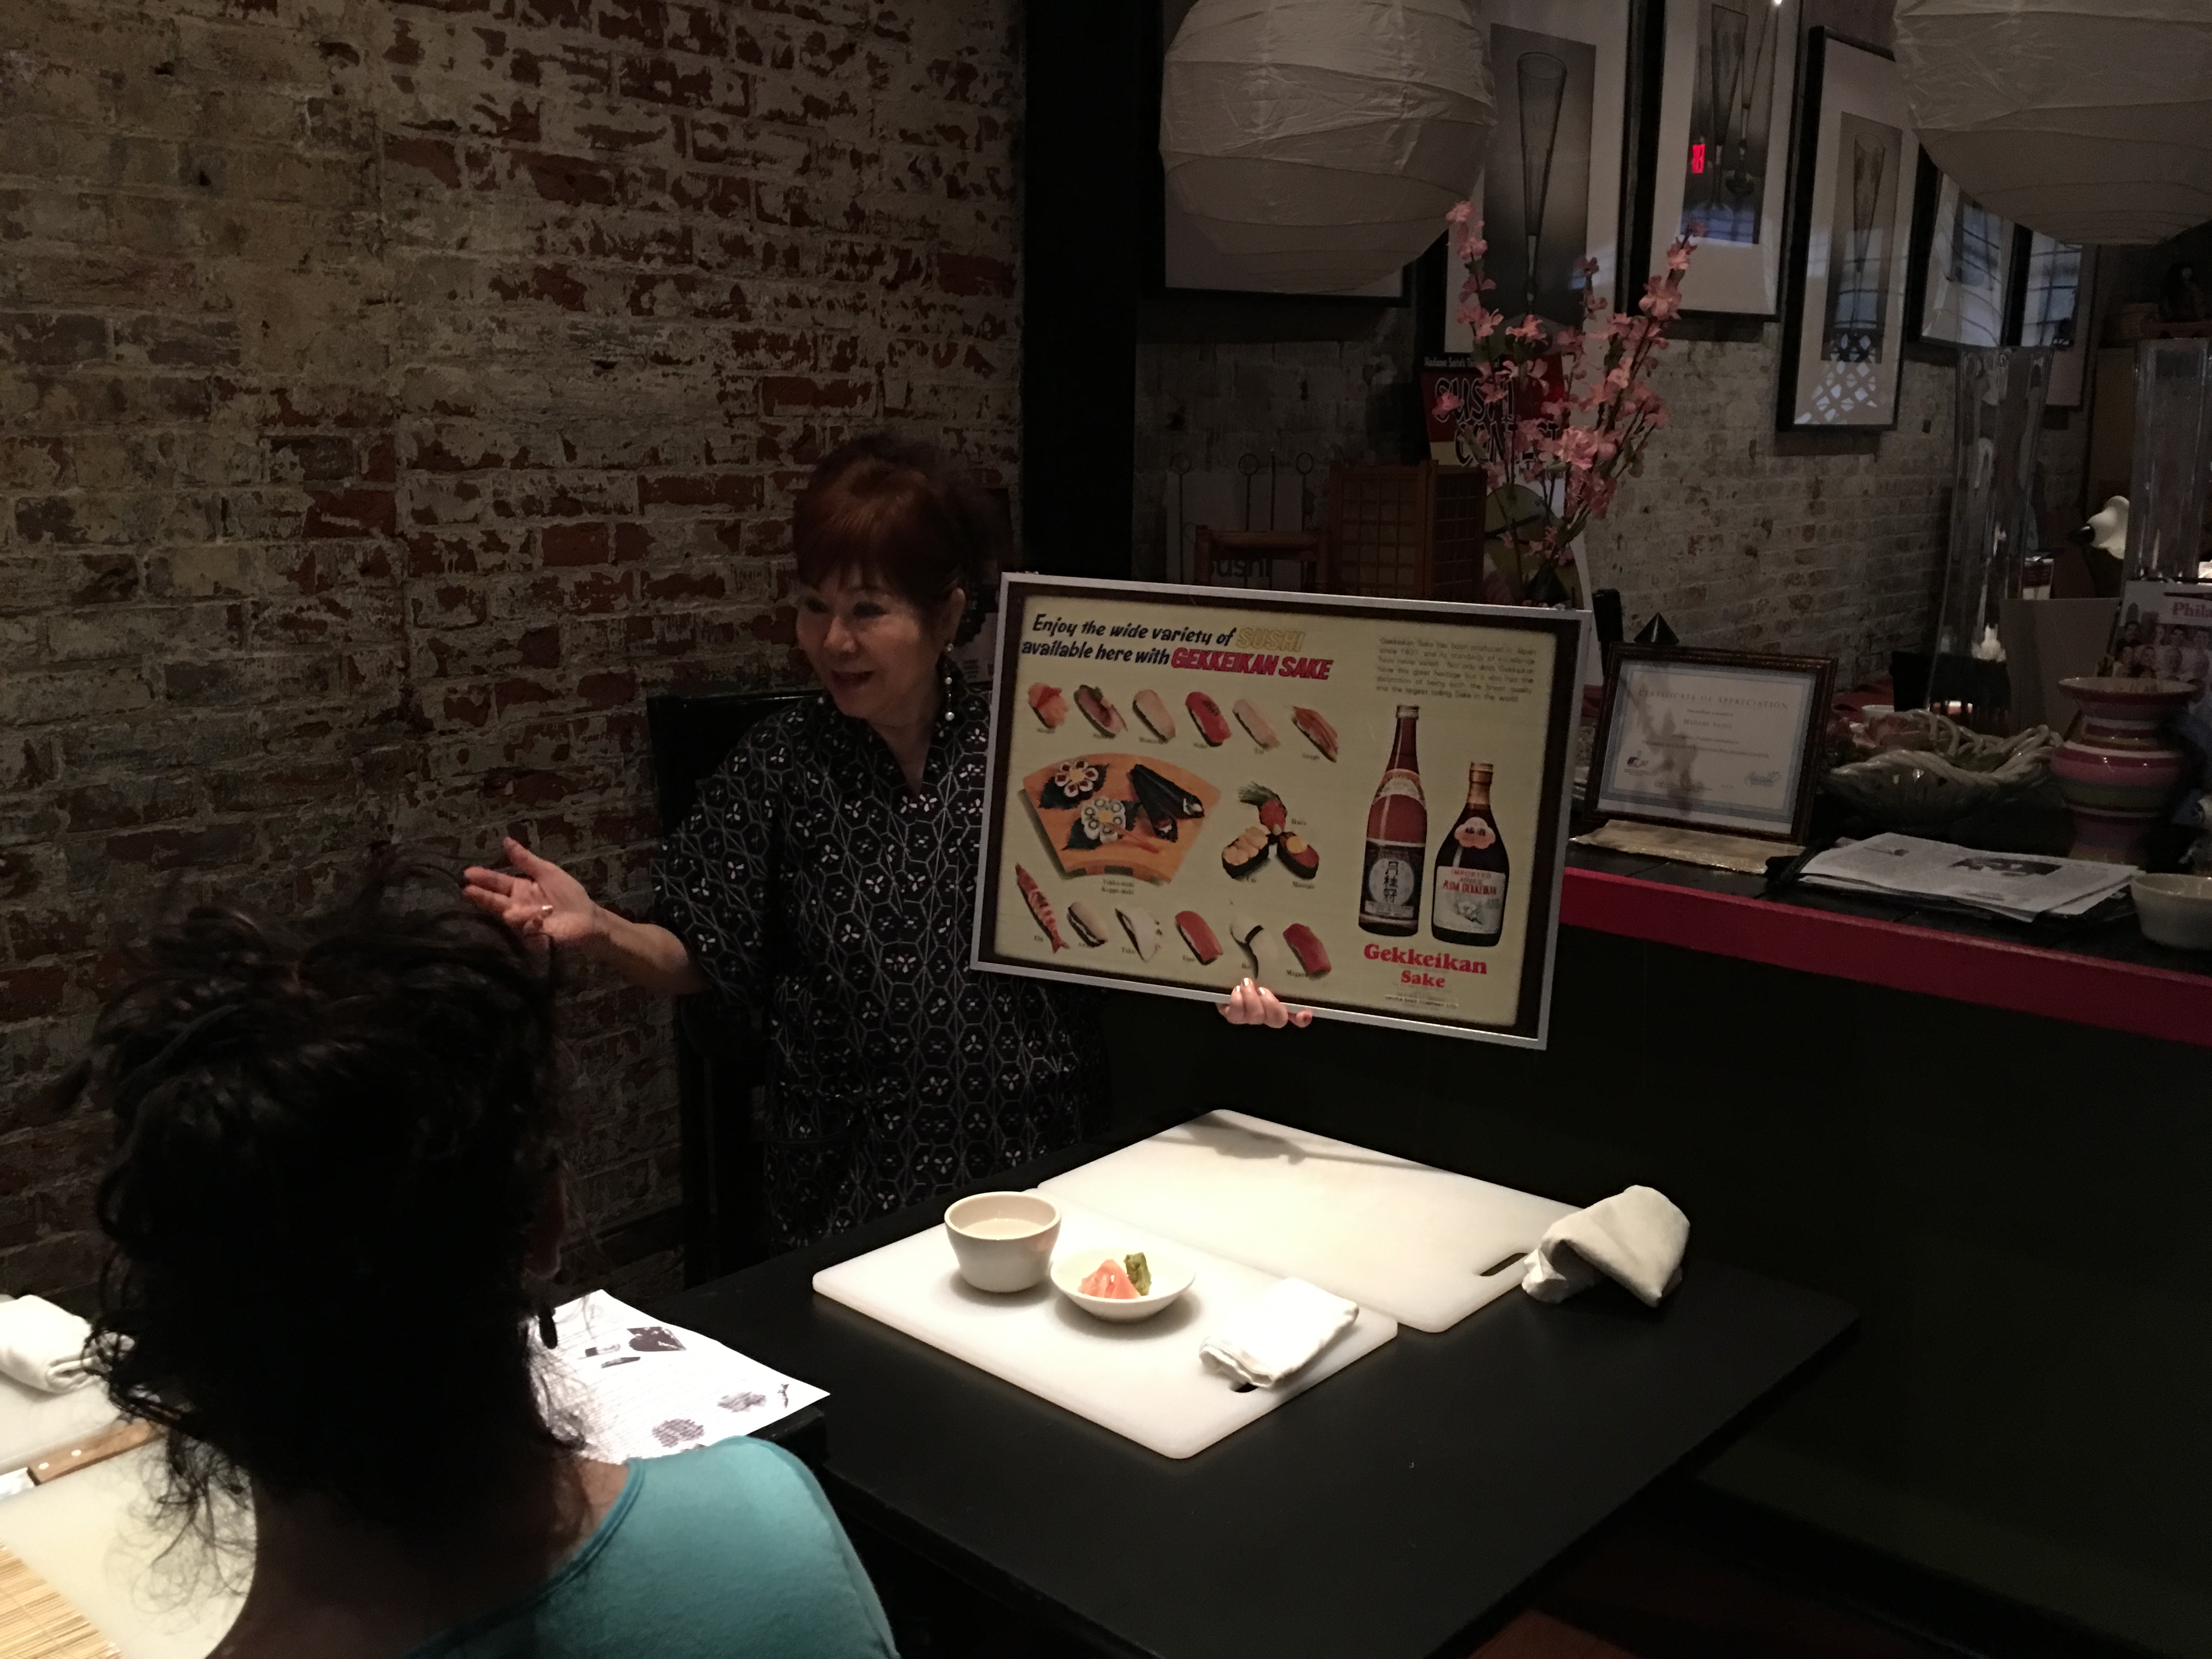 The 'Queen of Sushi' teaching about her trade. (Credit: Andrew Kramer)